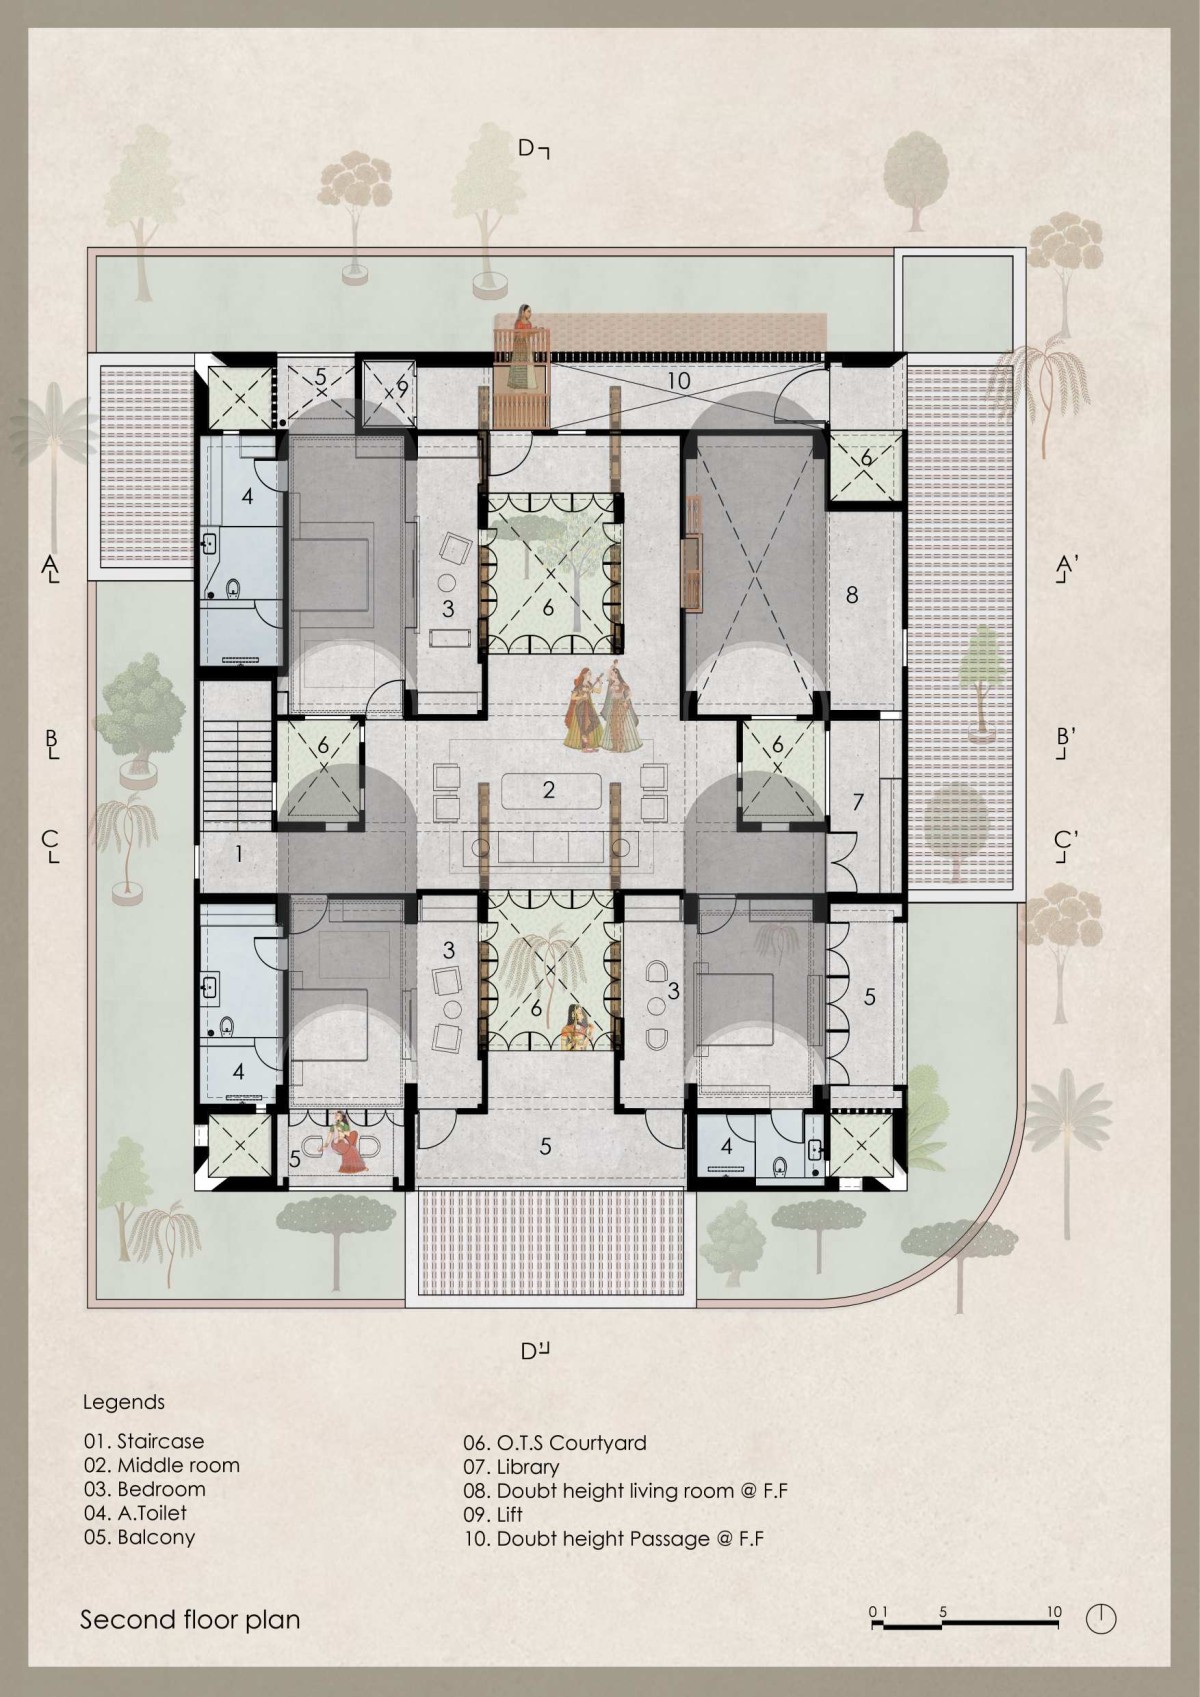 Second floor plan of The Maze House by MISA Architects